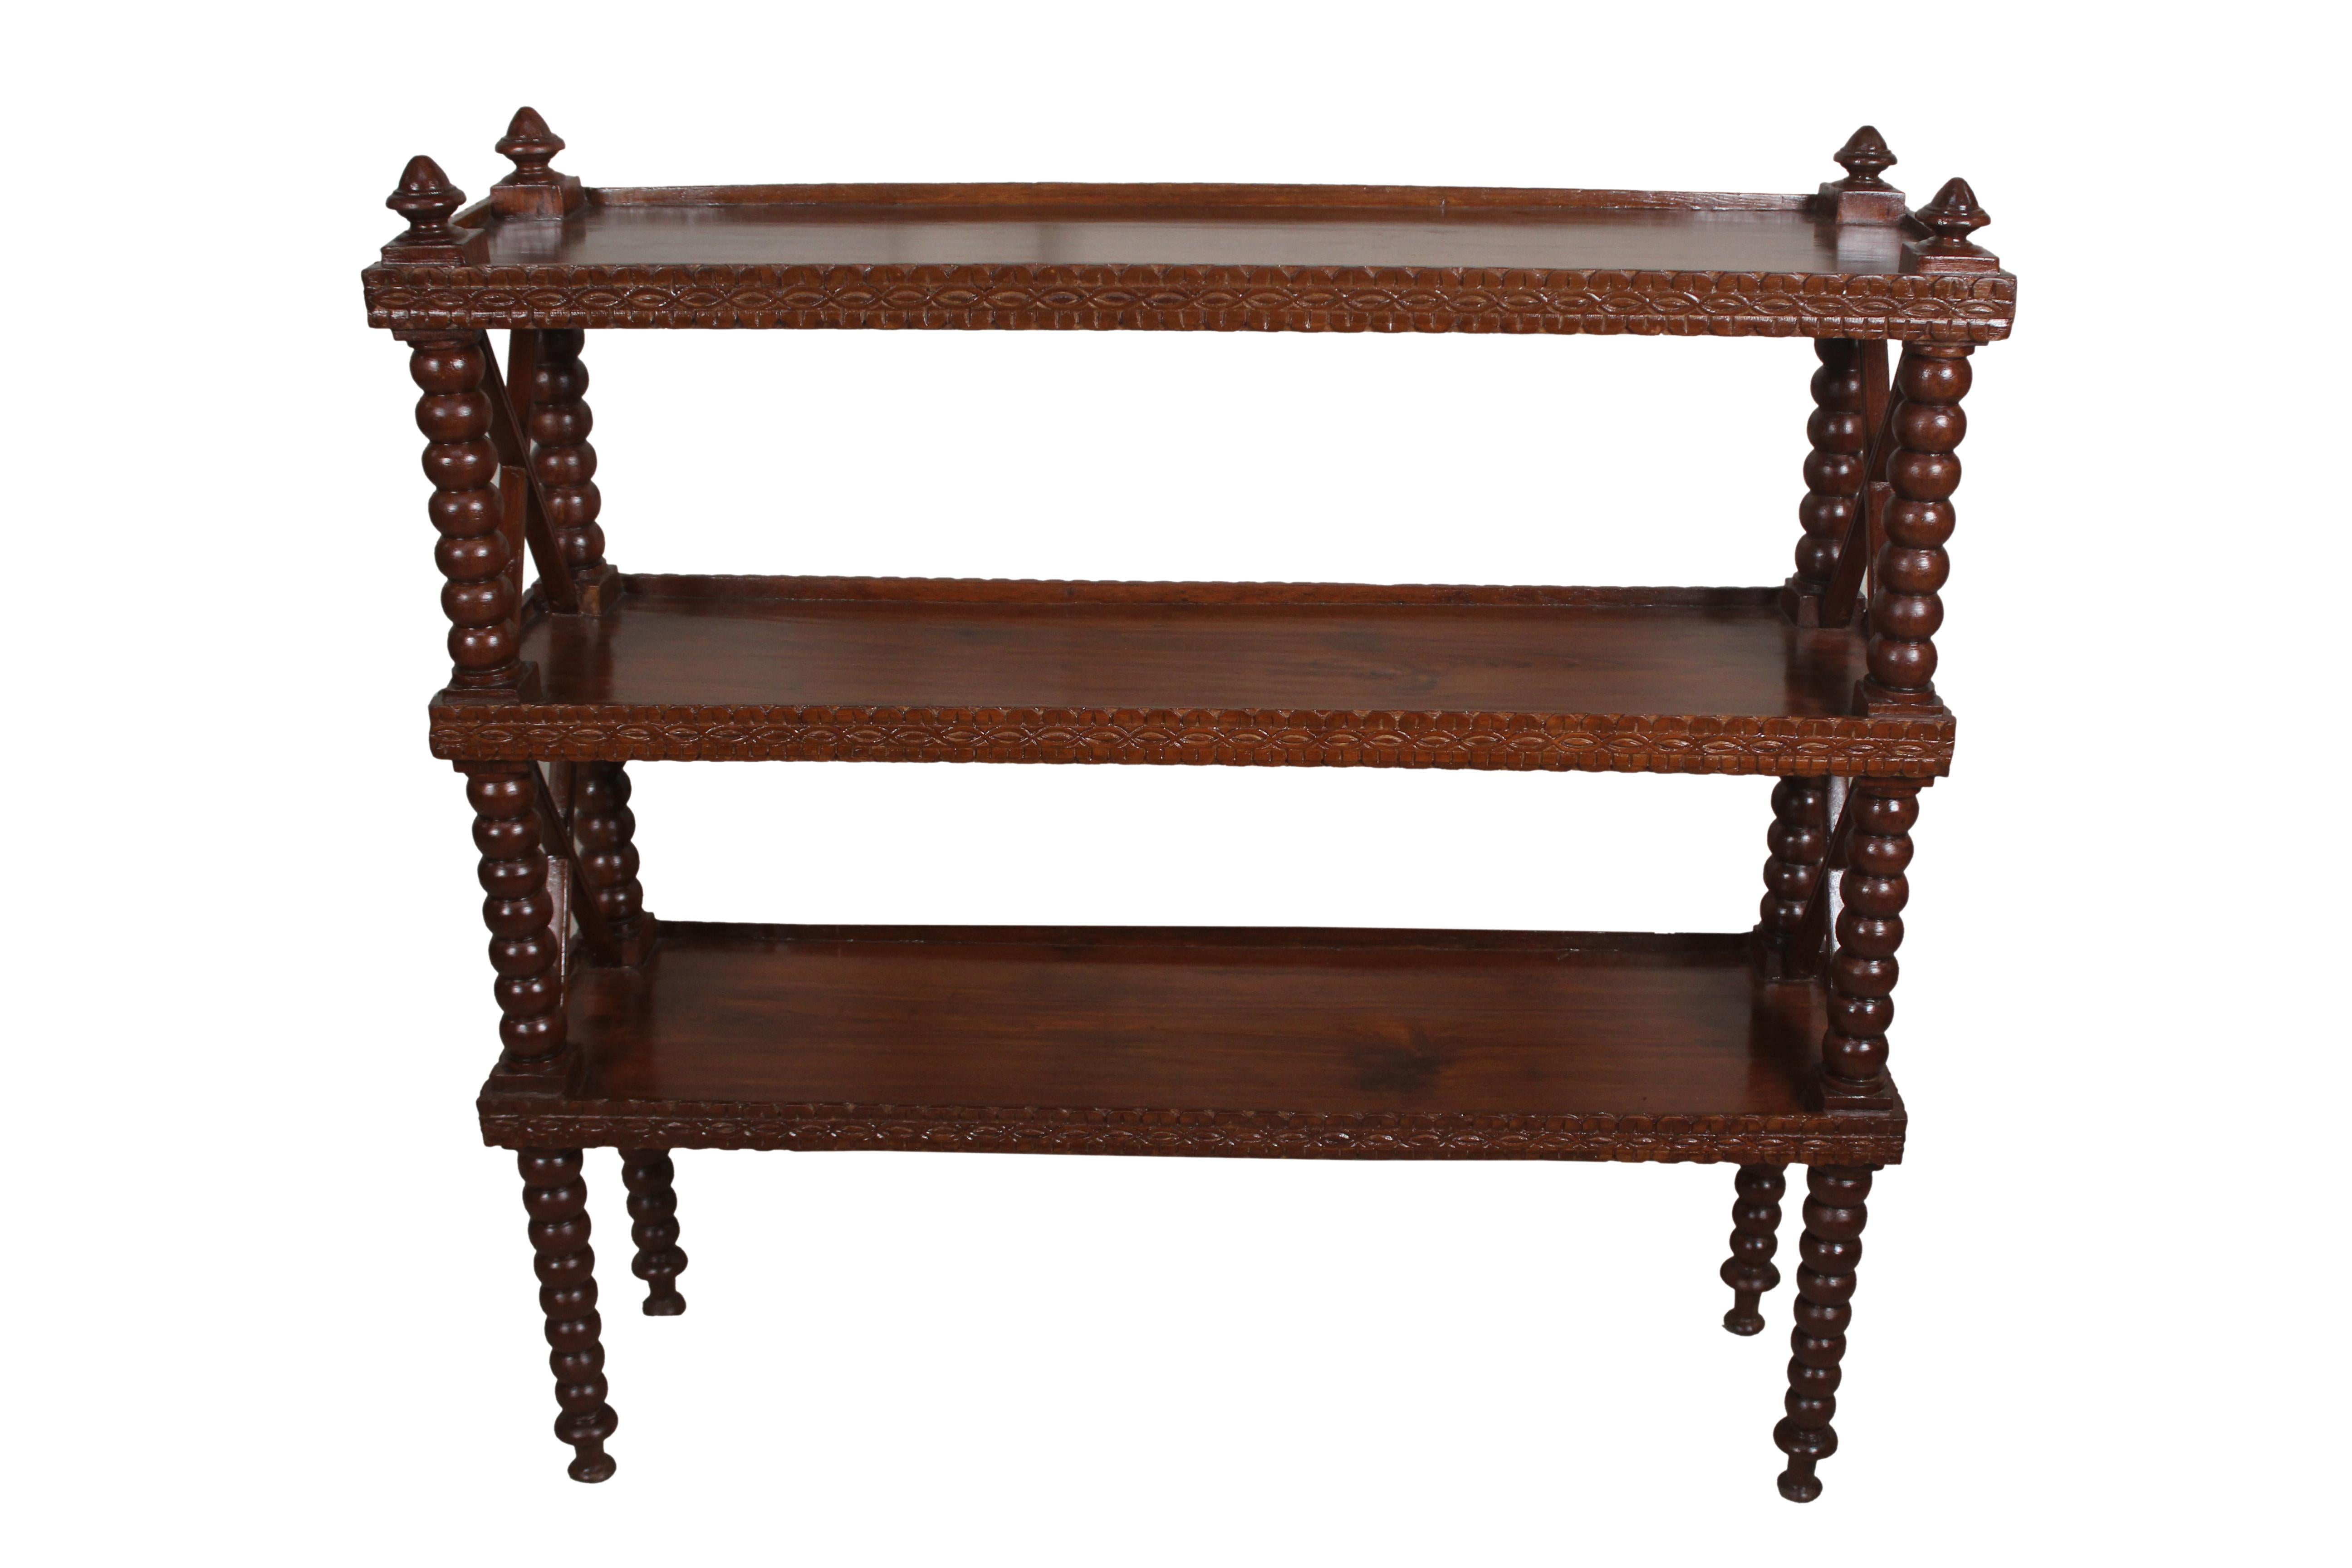 A large, three-tiered shelf, mahogany bookcase or étagère with hand turned bobbin spindles. Also carved fronts with a slight limp along all the edges keeping books and keepsakes from sliding off. Bobbins spindles are slightly tapered at the bottom,